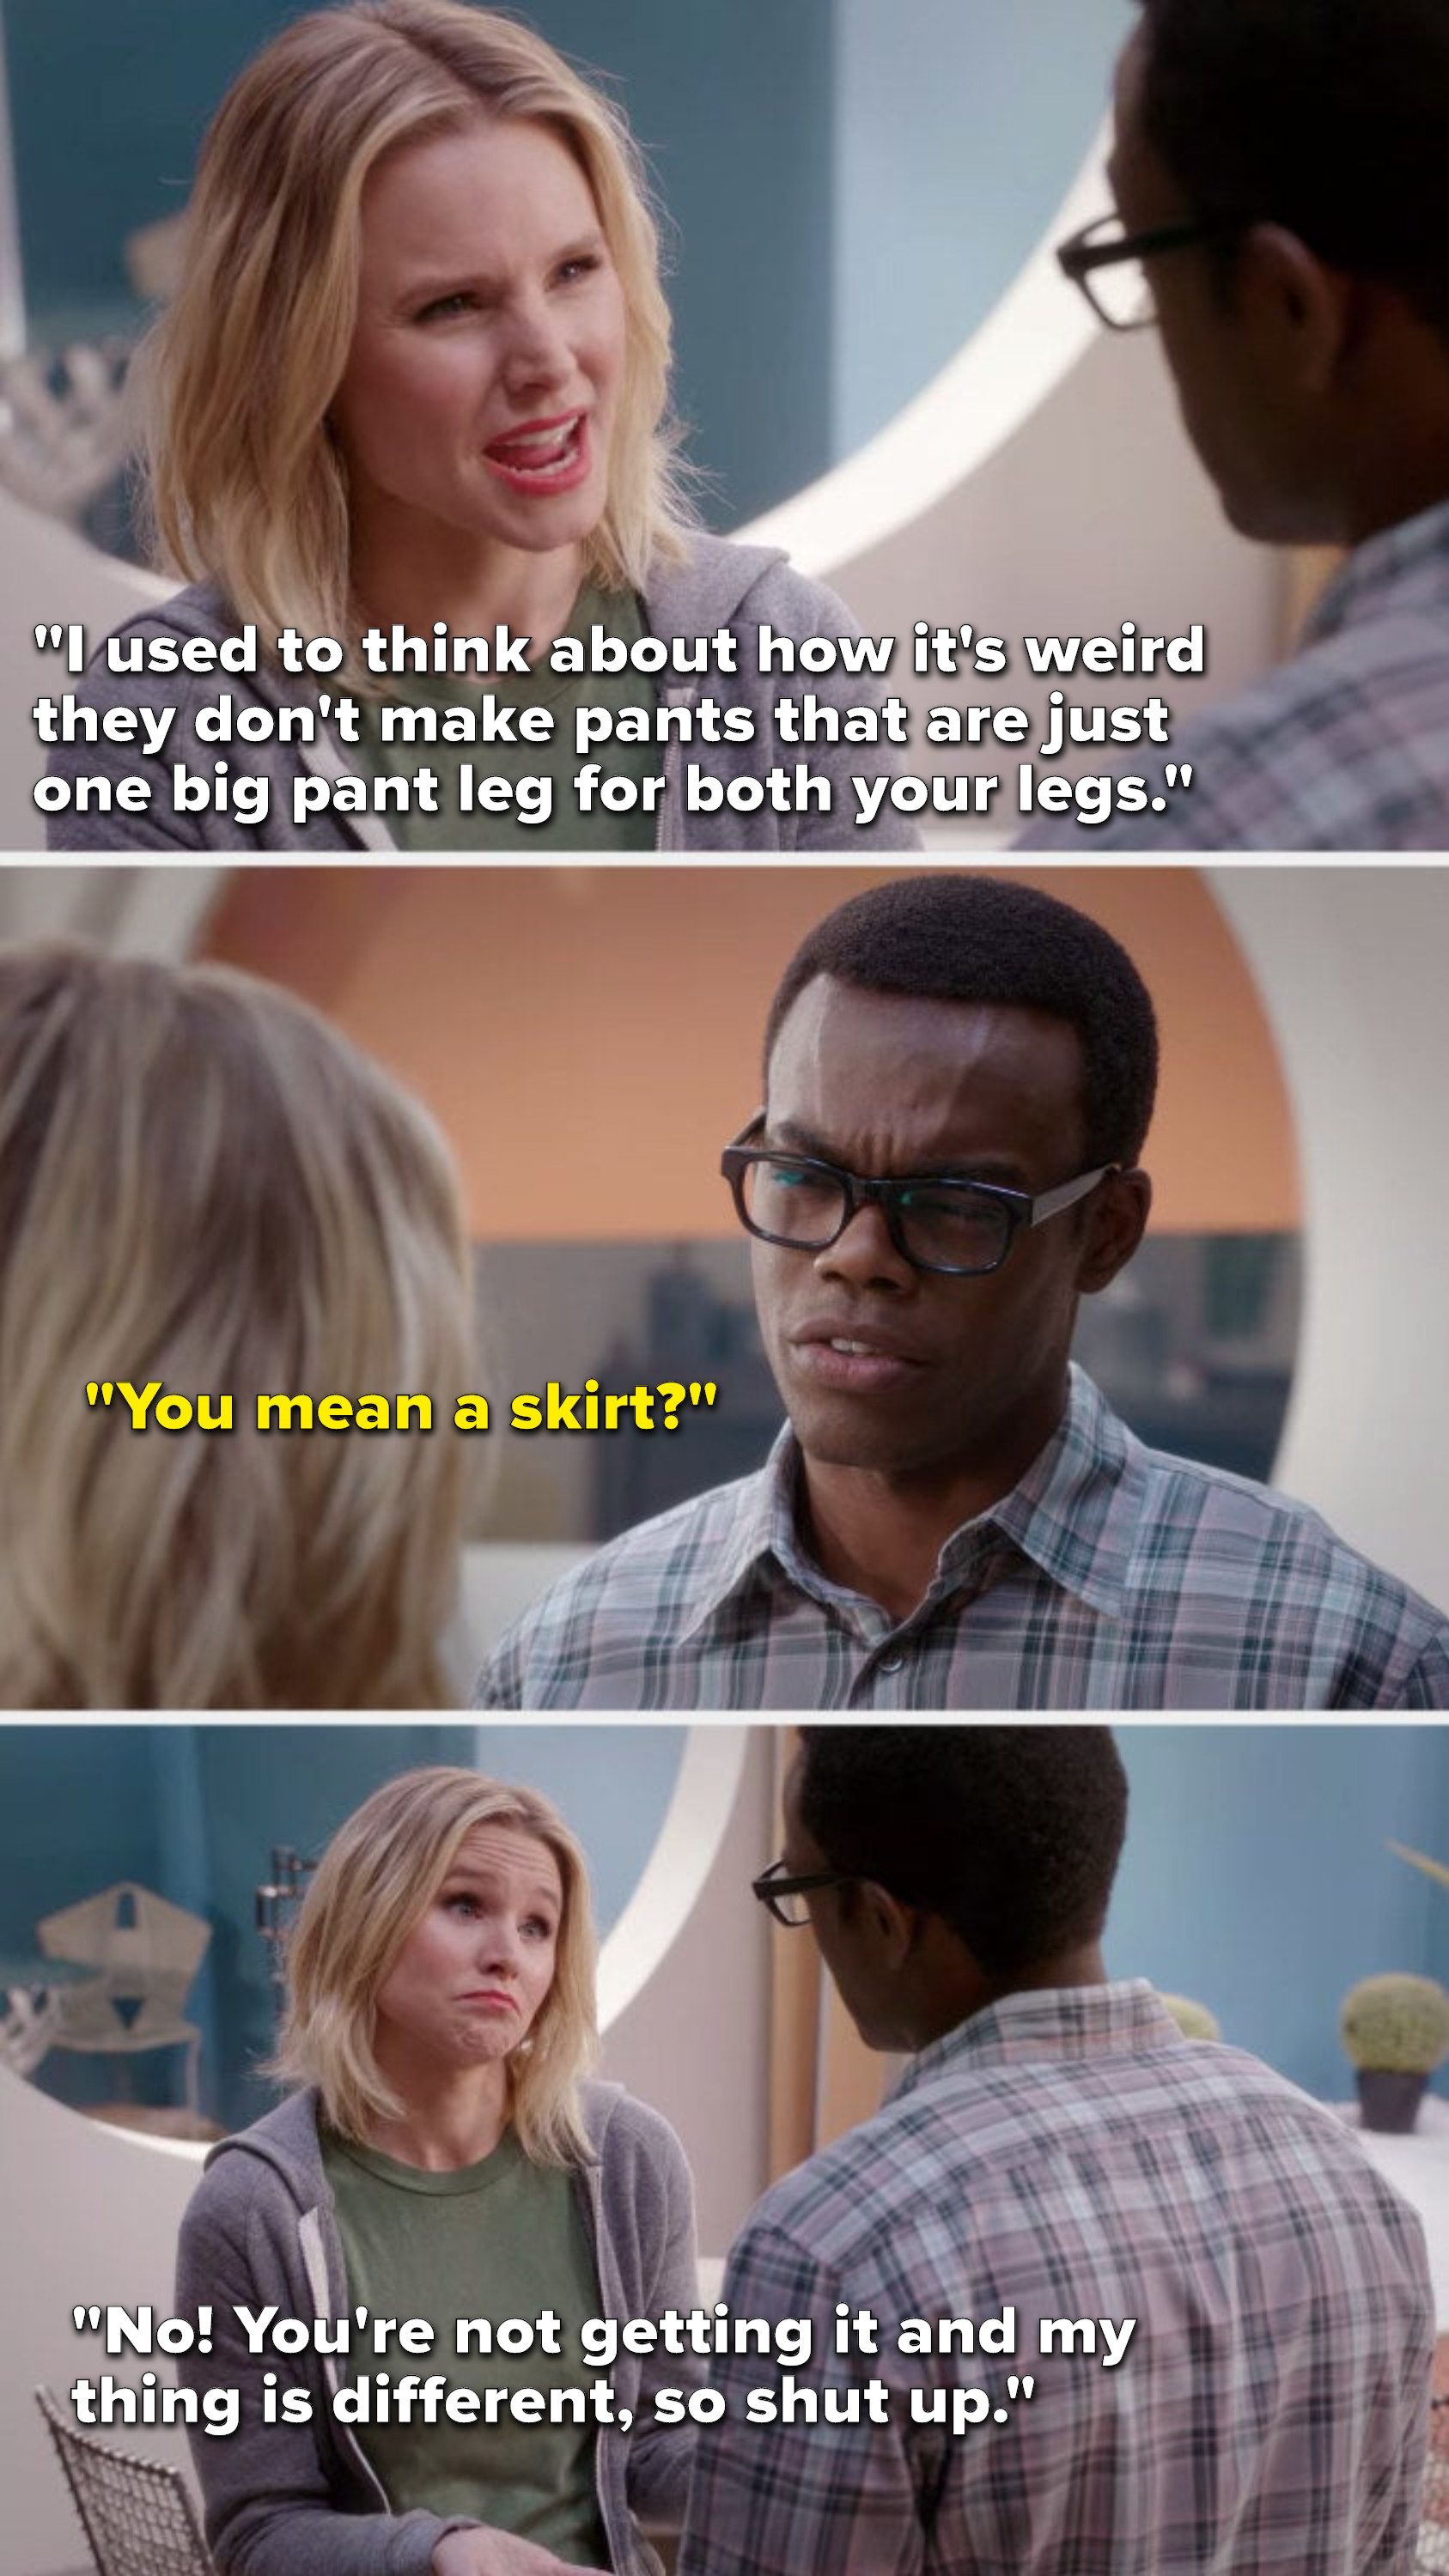 Eleanor says, &quot;I used to think about how it&#x27;s weird they don&#x27;t make pants that are just one big pant leg for both your legs,&quot; Chidi says, &quot;You mean a skirt,&quot; and Eleanor says, &quot;No, you&#x27;re not getting it and my thing is different, so shut up&quot;